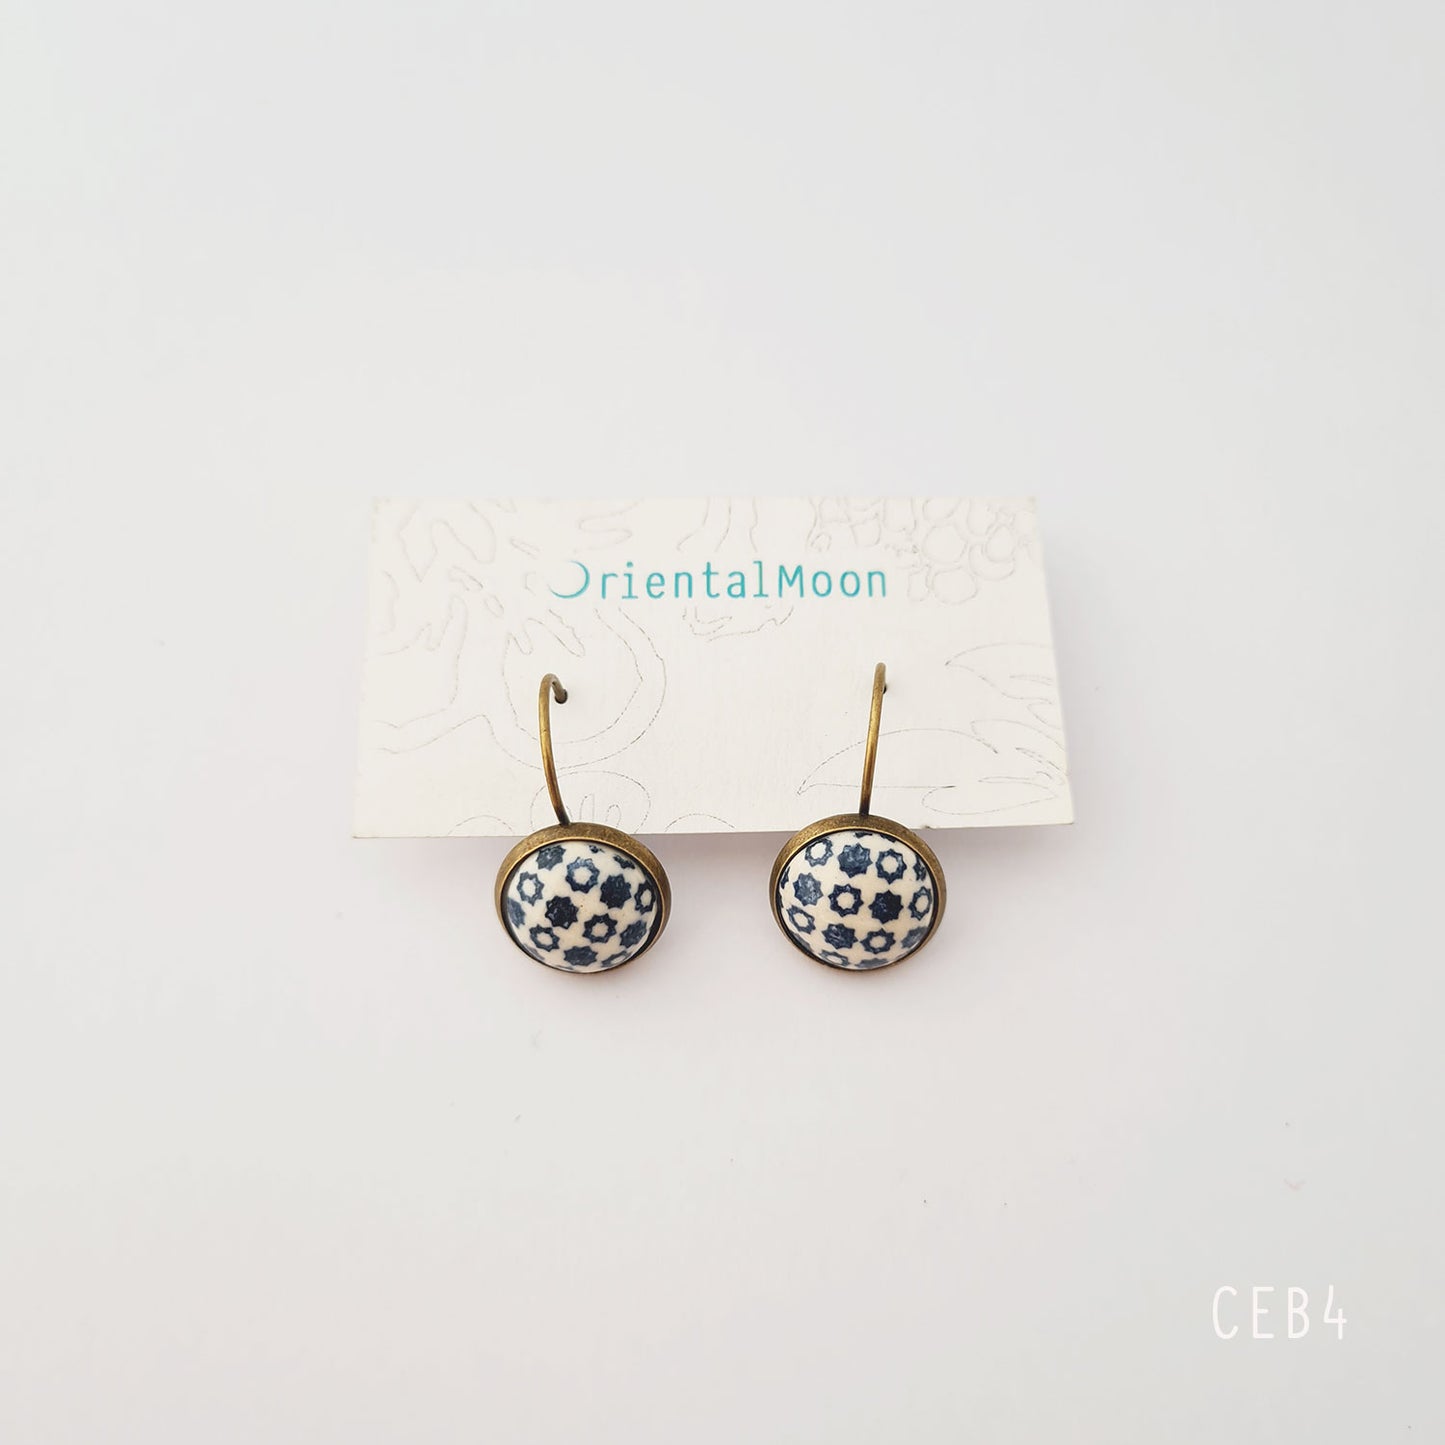 Cabonchon lever back earrings with brass base (blue)ต่างหูหลังเต่าแบบเกี่ยว ( Pattern type)